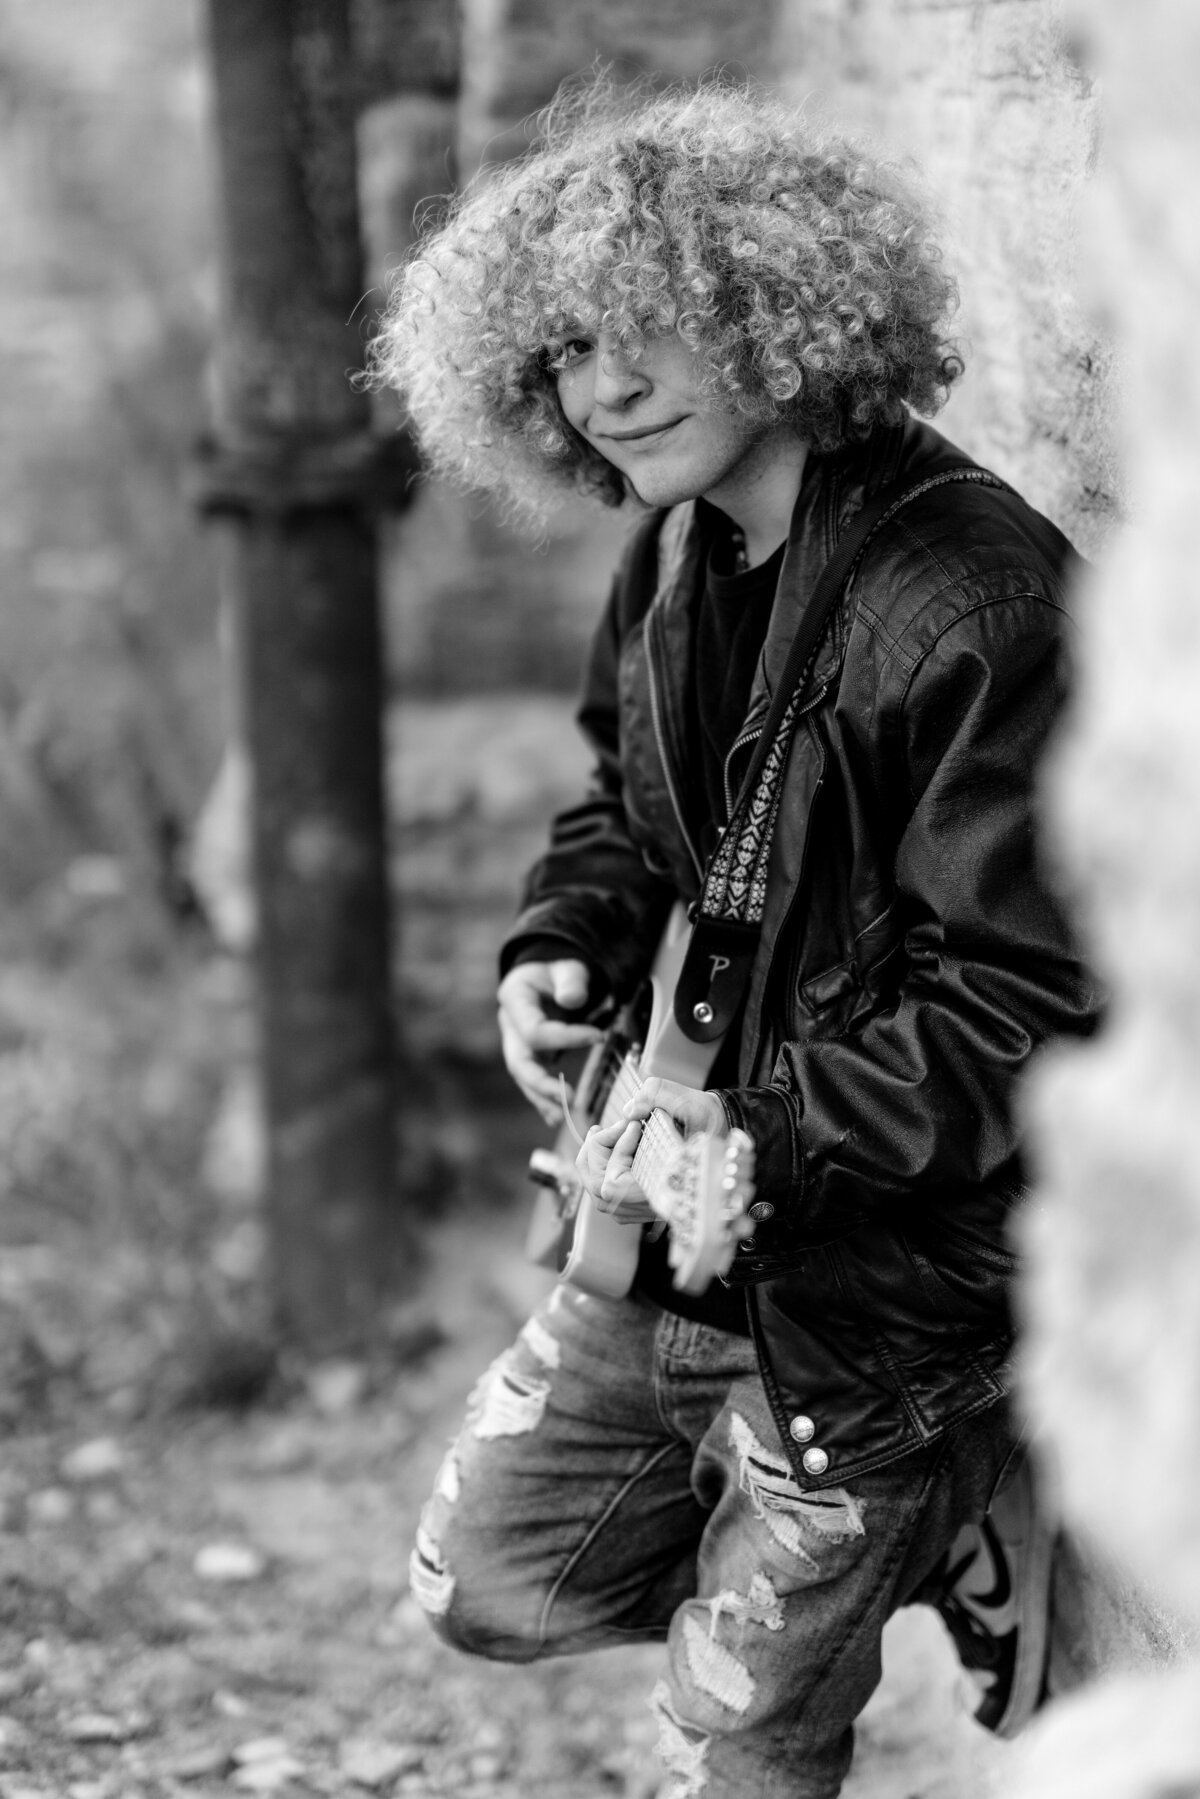 Senior boy with afro dressed in leather jacket plays guitar.